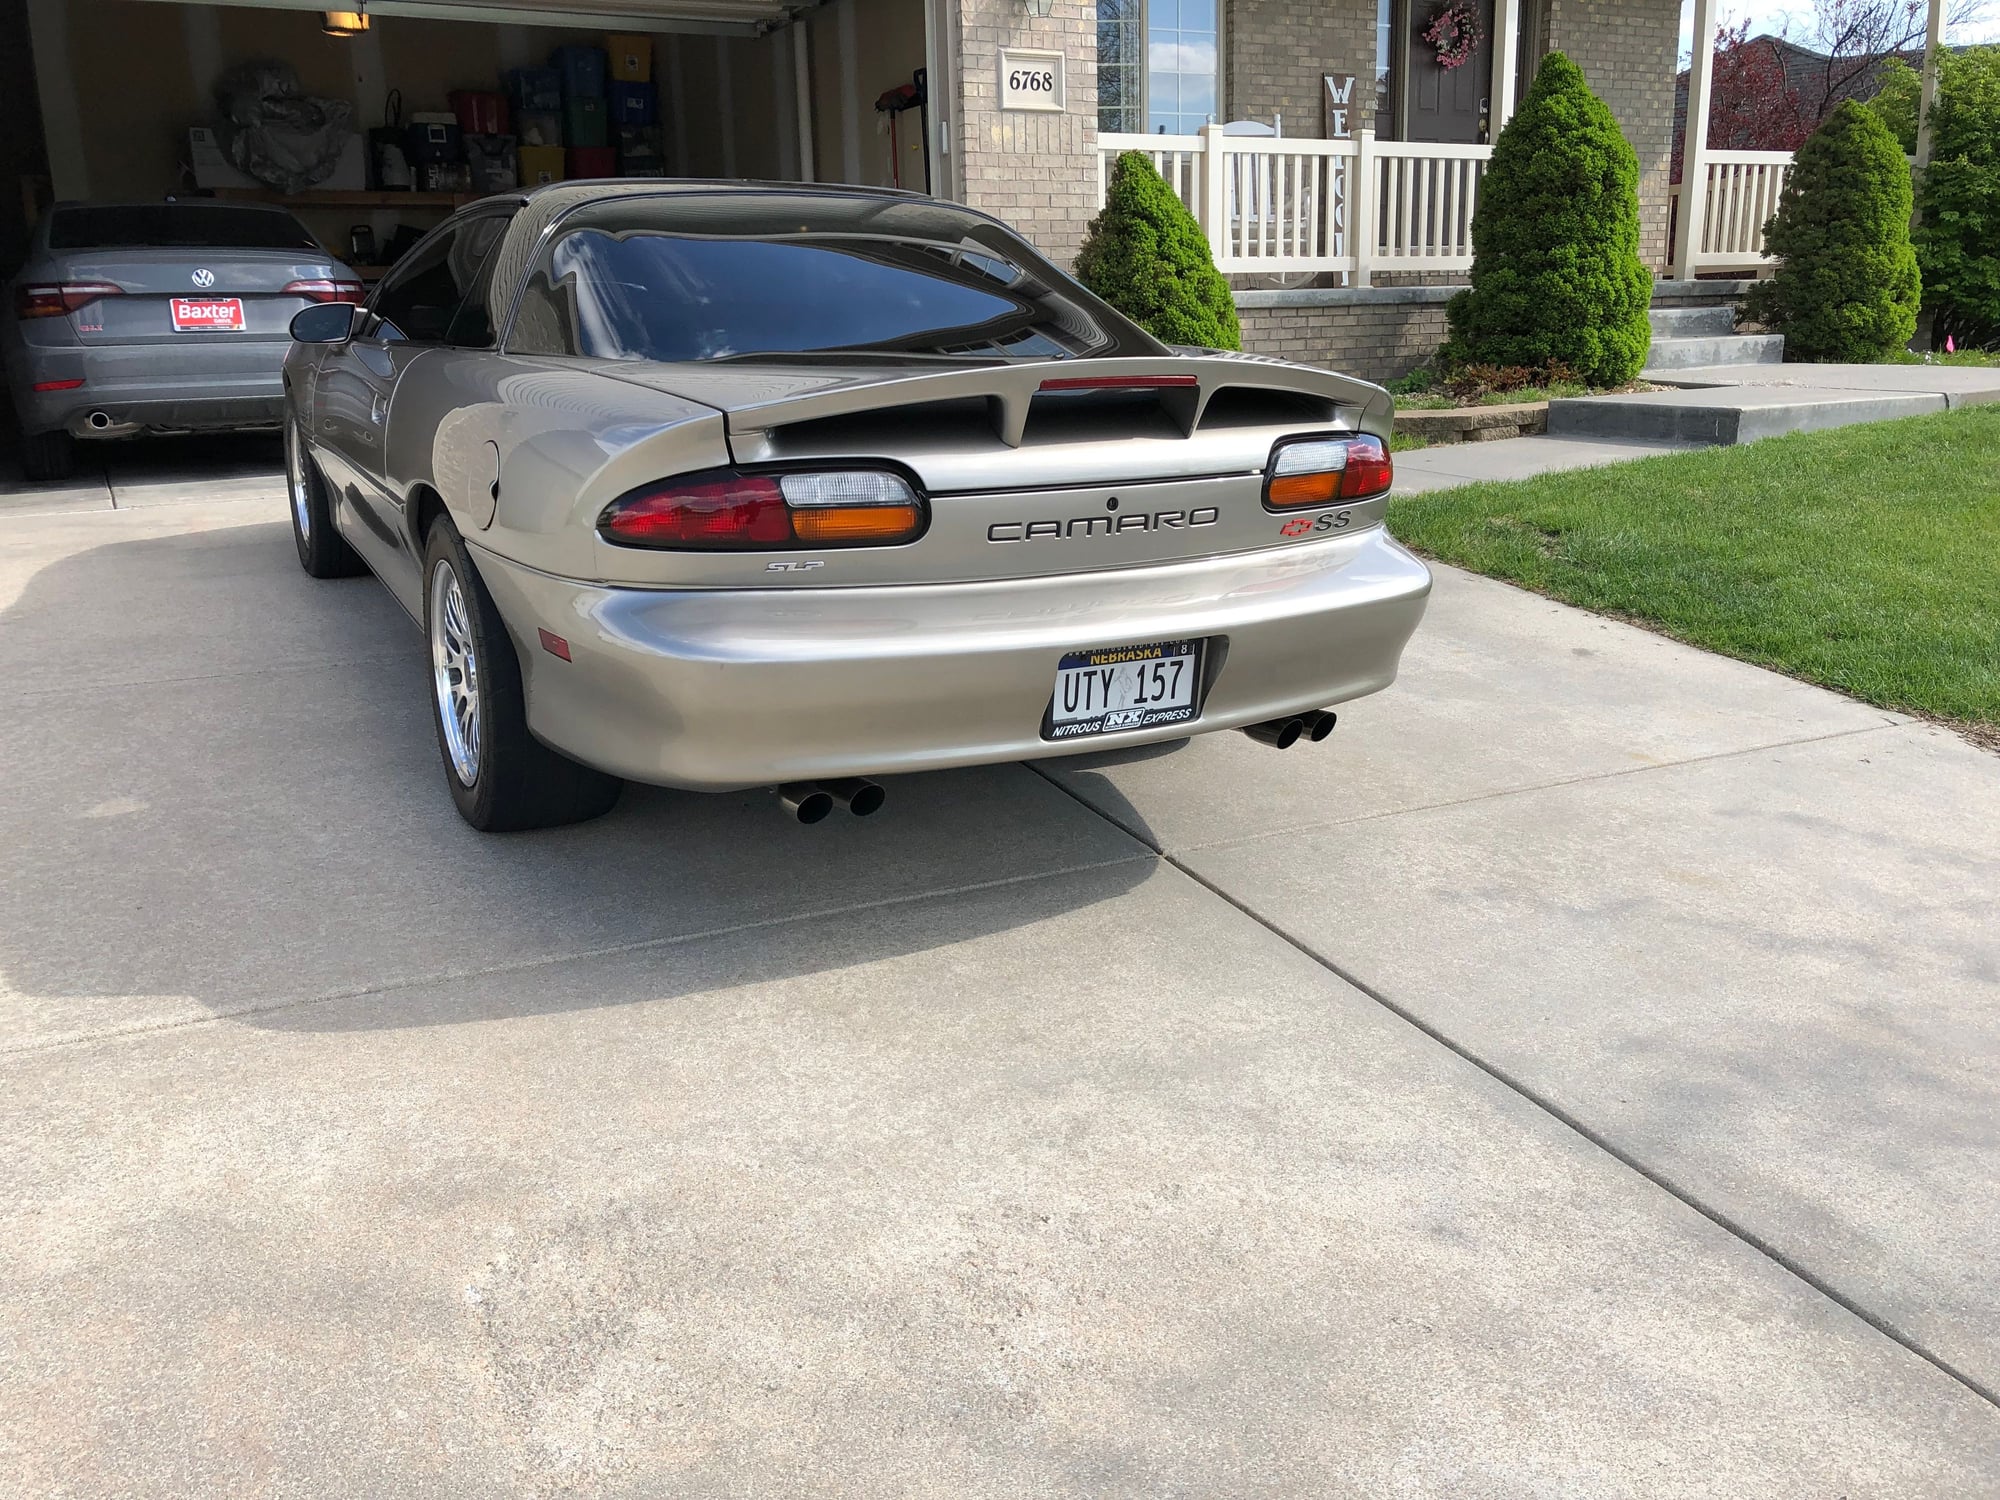 2001 Chevrolet Camaro - 01 Z28 408 Clean Nice Well Built Car - 89,000 on body OBO/Trade - Used - VIN 2G1FP22G912142237 - 8 cyl - 2WD - Automatic - Coupe - Other - Lincoln, NE 68526, United States